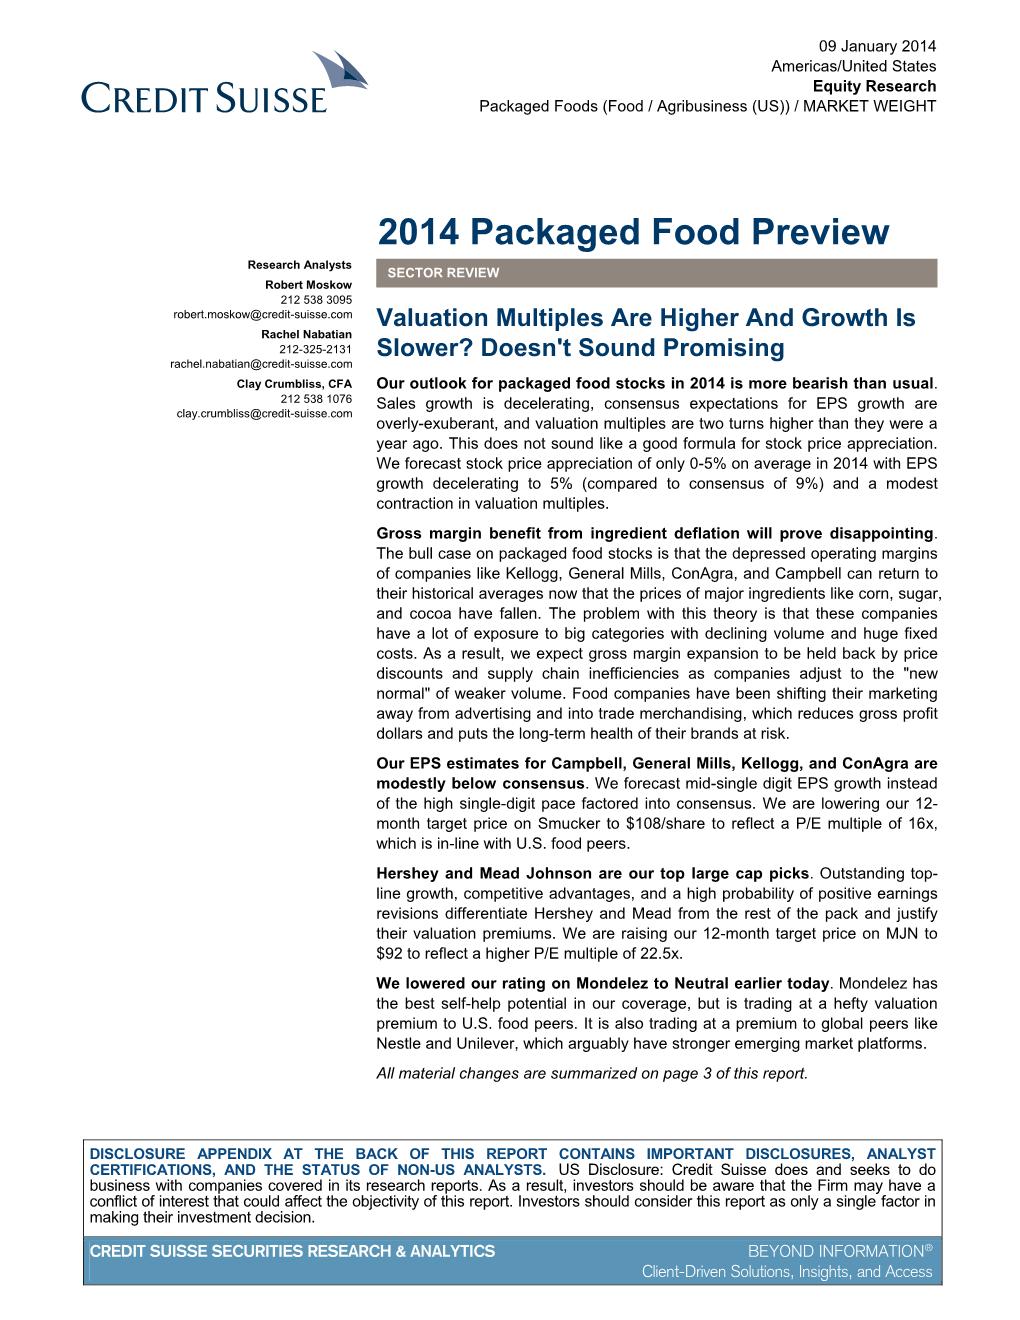 Packaged Foods (Food / Agribusiness (US)) / MARKET WEIGHT